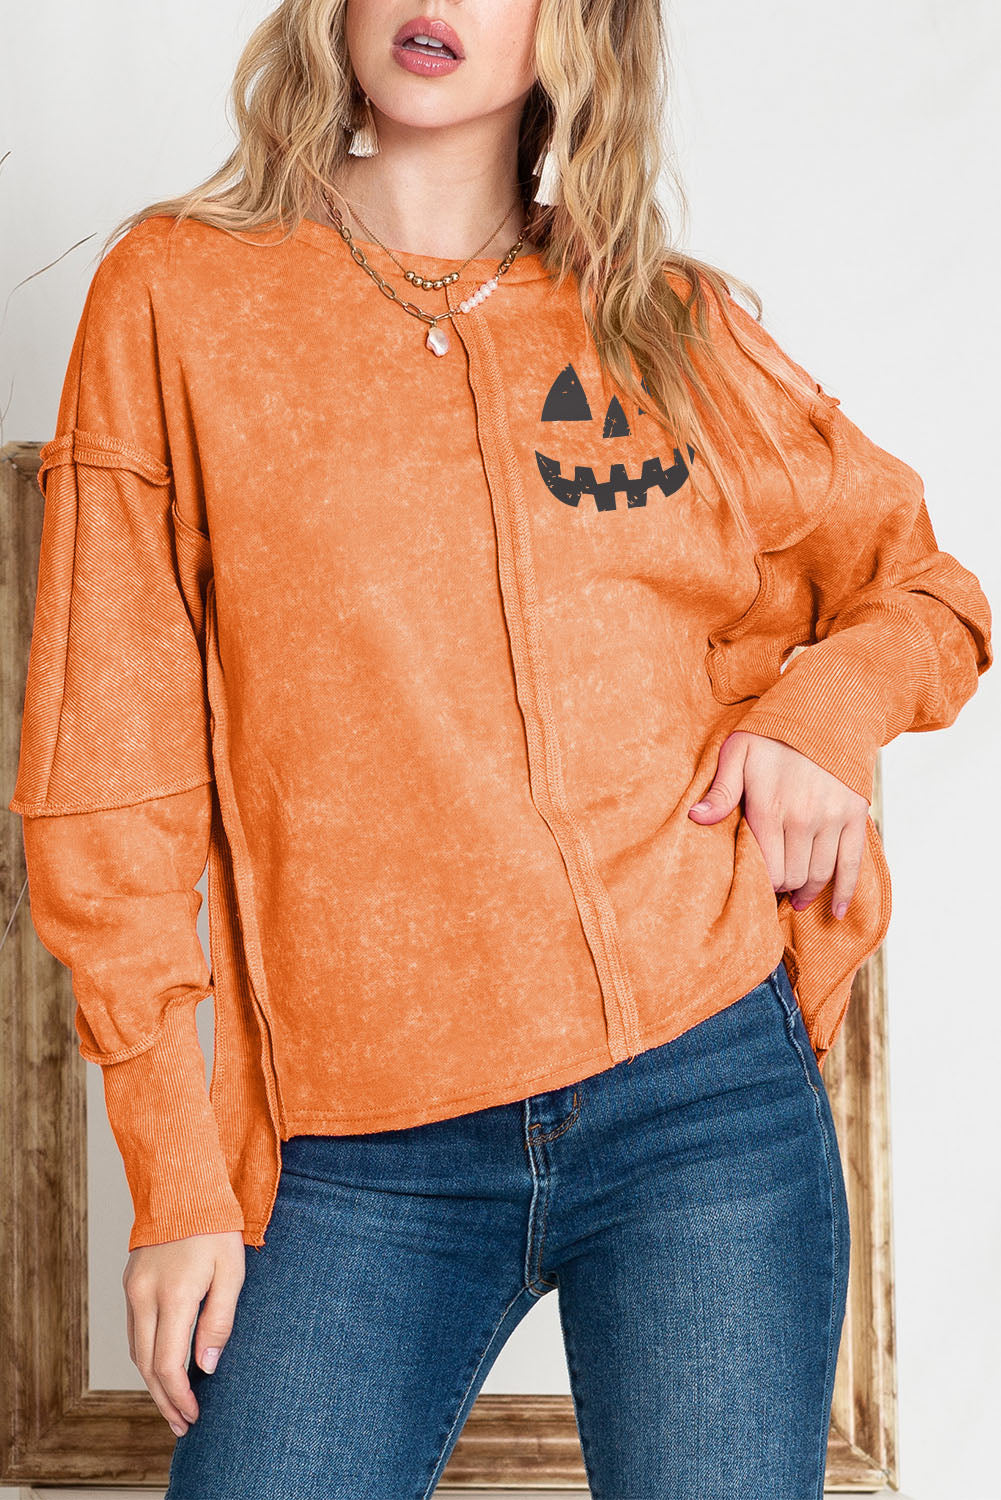 Round Neck Long Sleeve Jack-O’-Lantern Graphic Blouse - Women’s Clothing & Accessories - Shirts & Tops - 3 - 2024